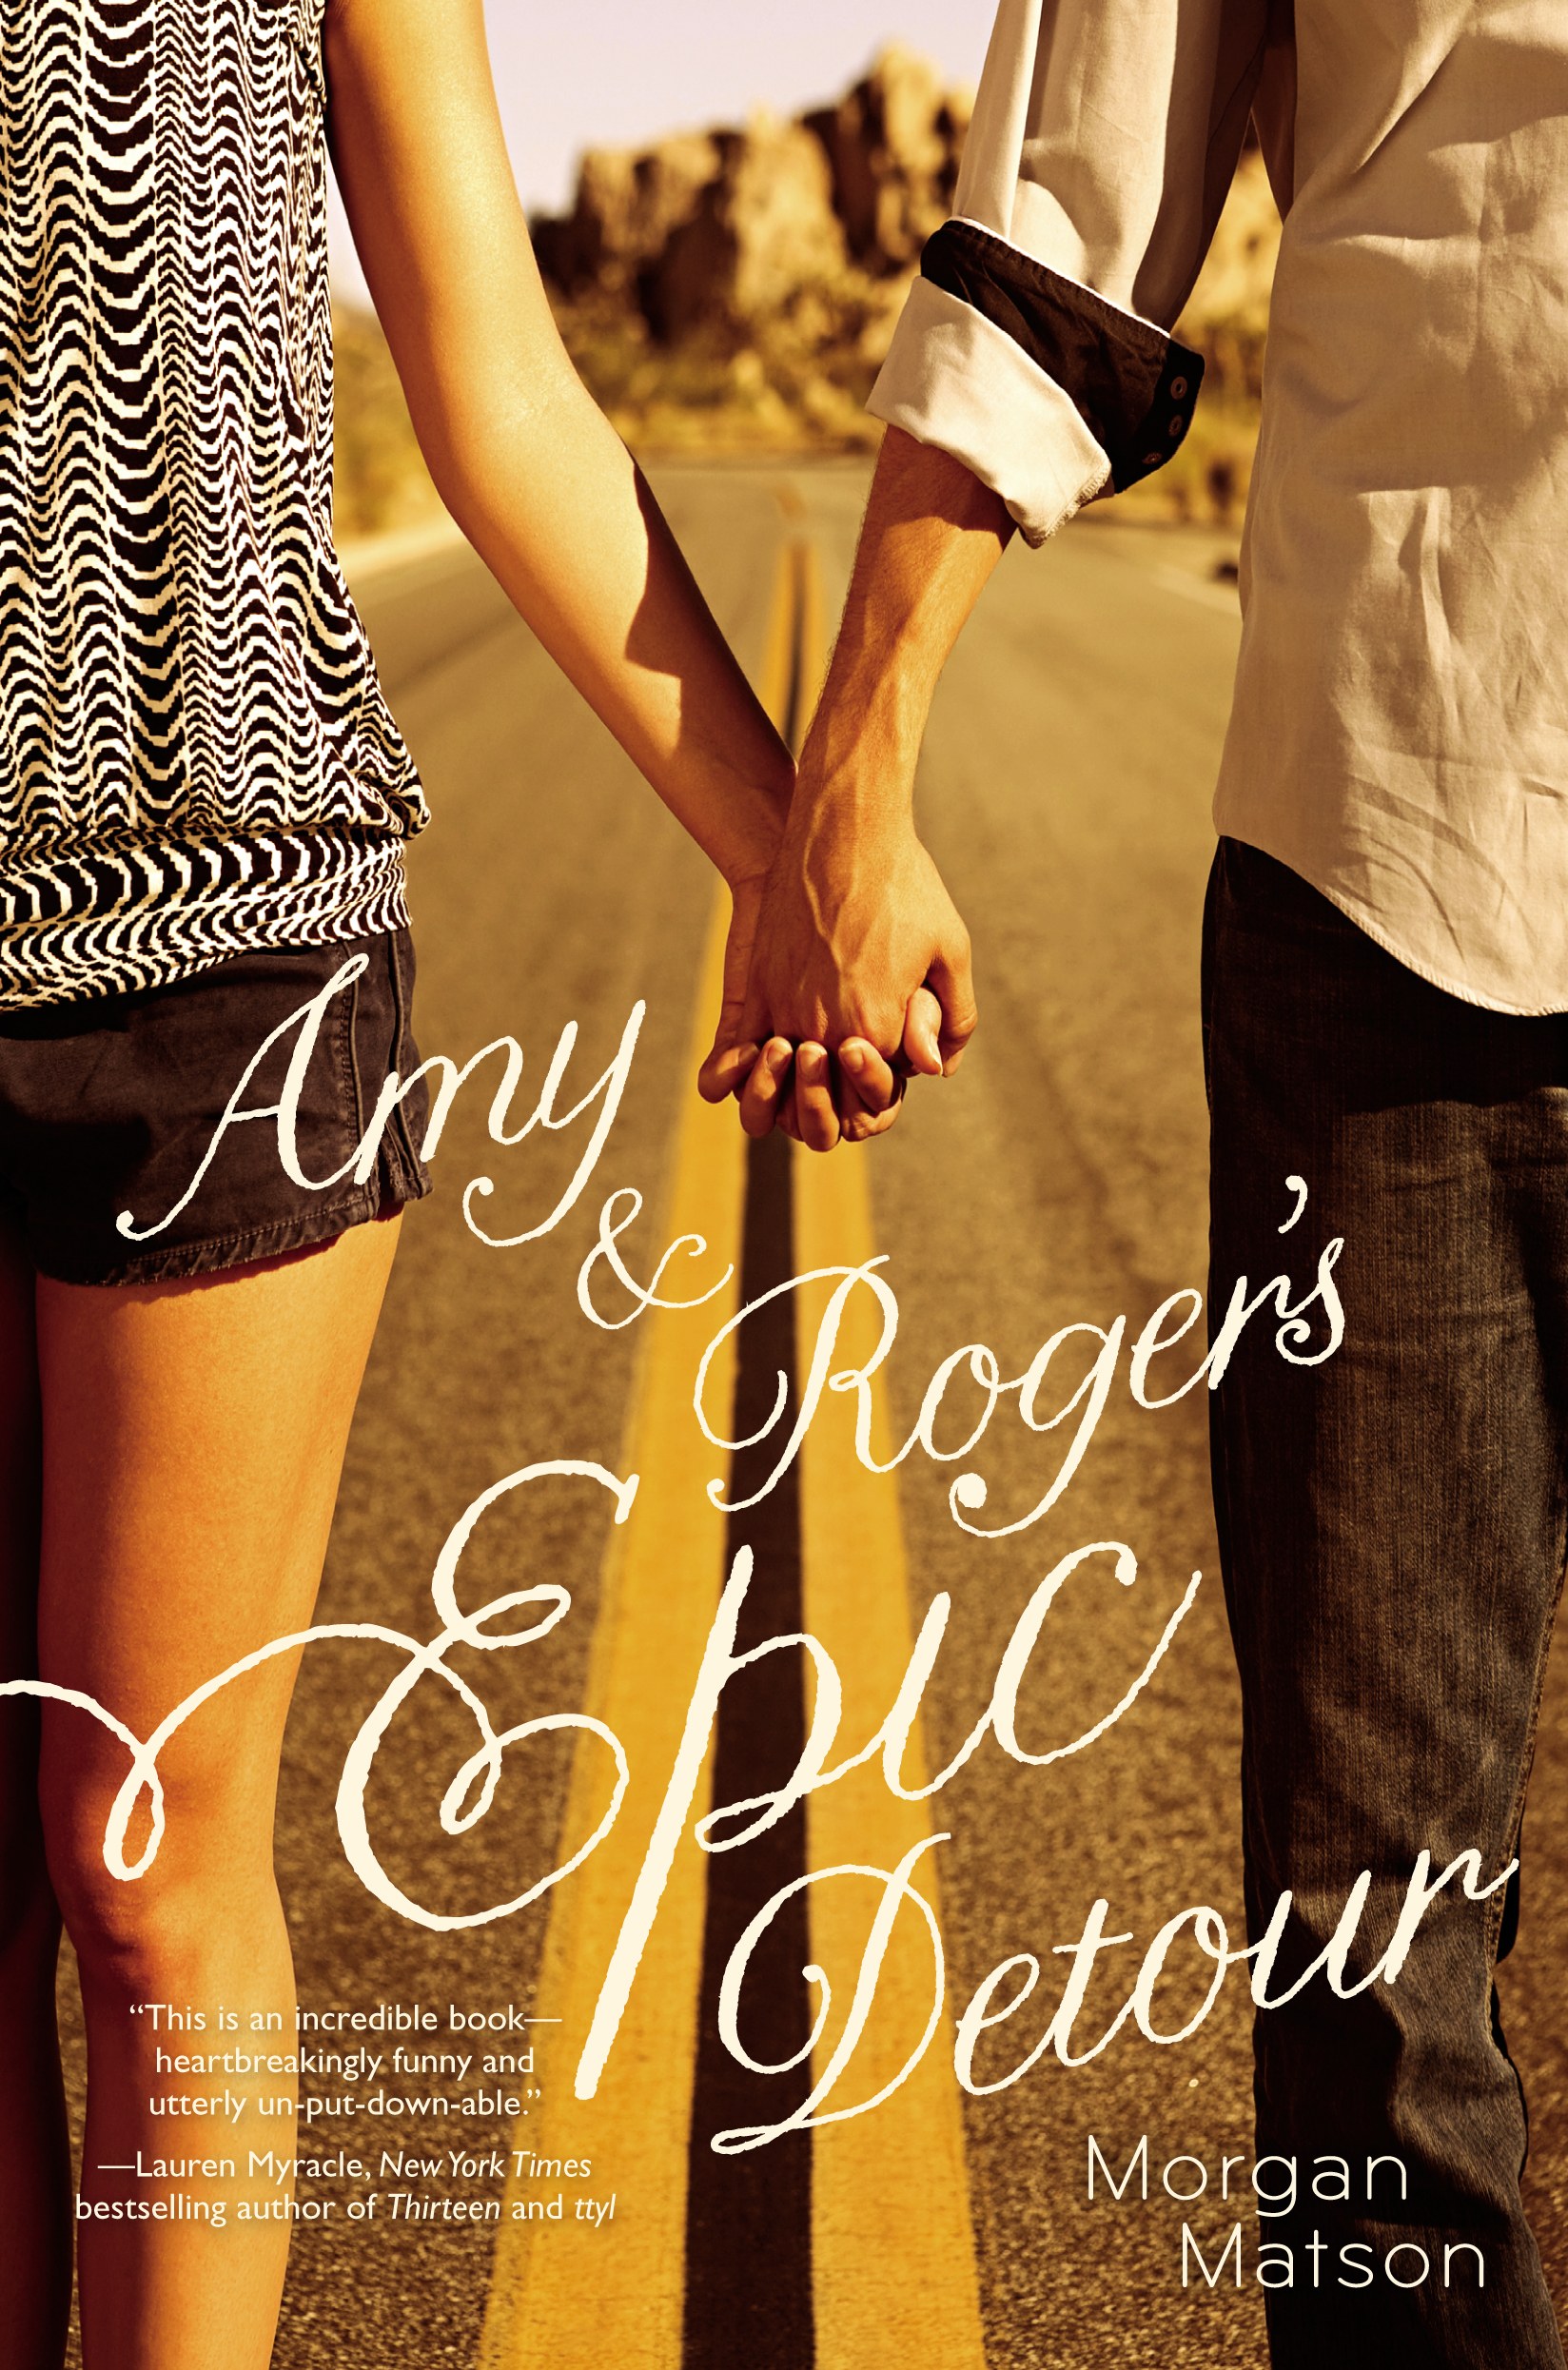 Book Review ‘Amy & Roger’s Epic Detour’ by Matson The News Wheel